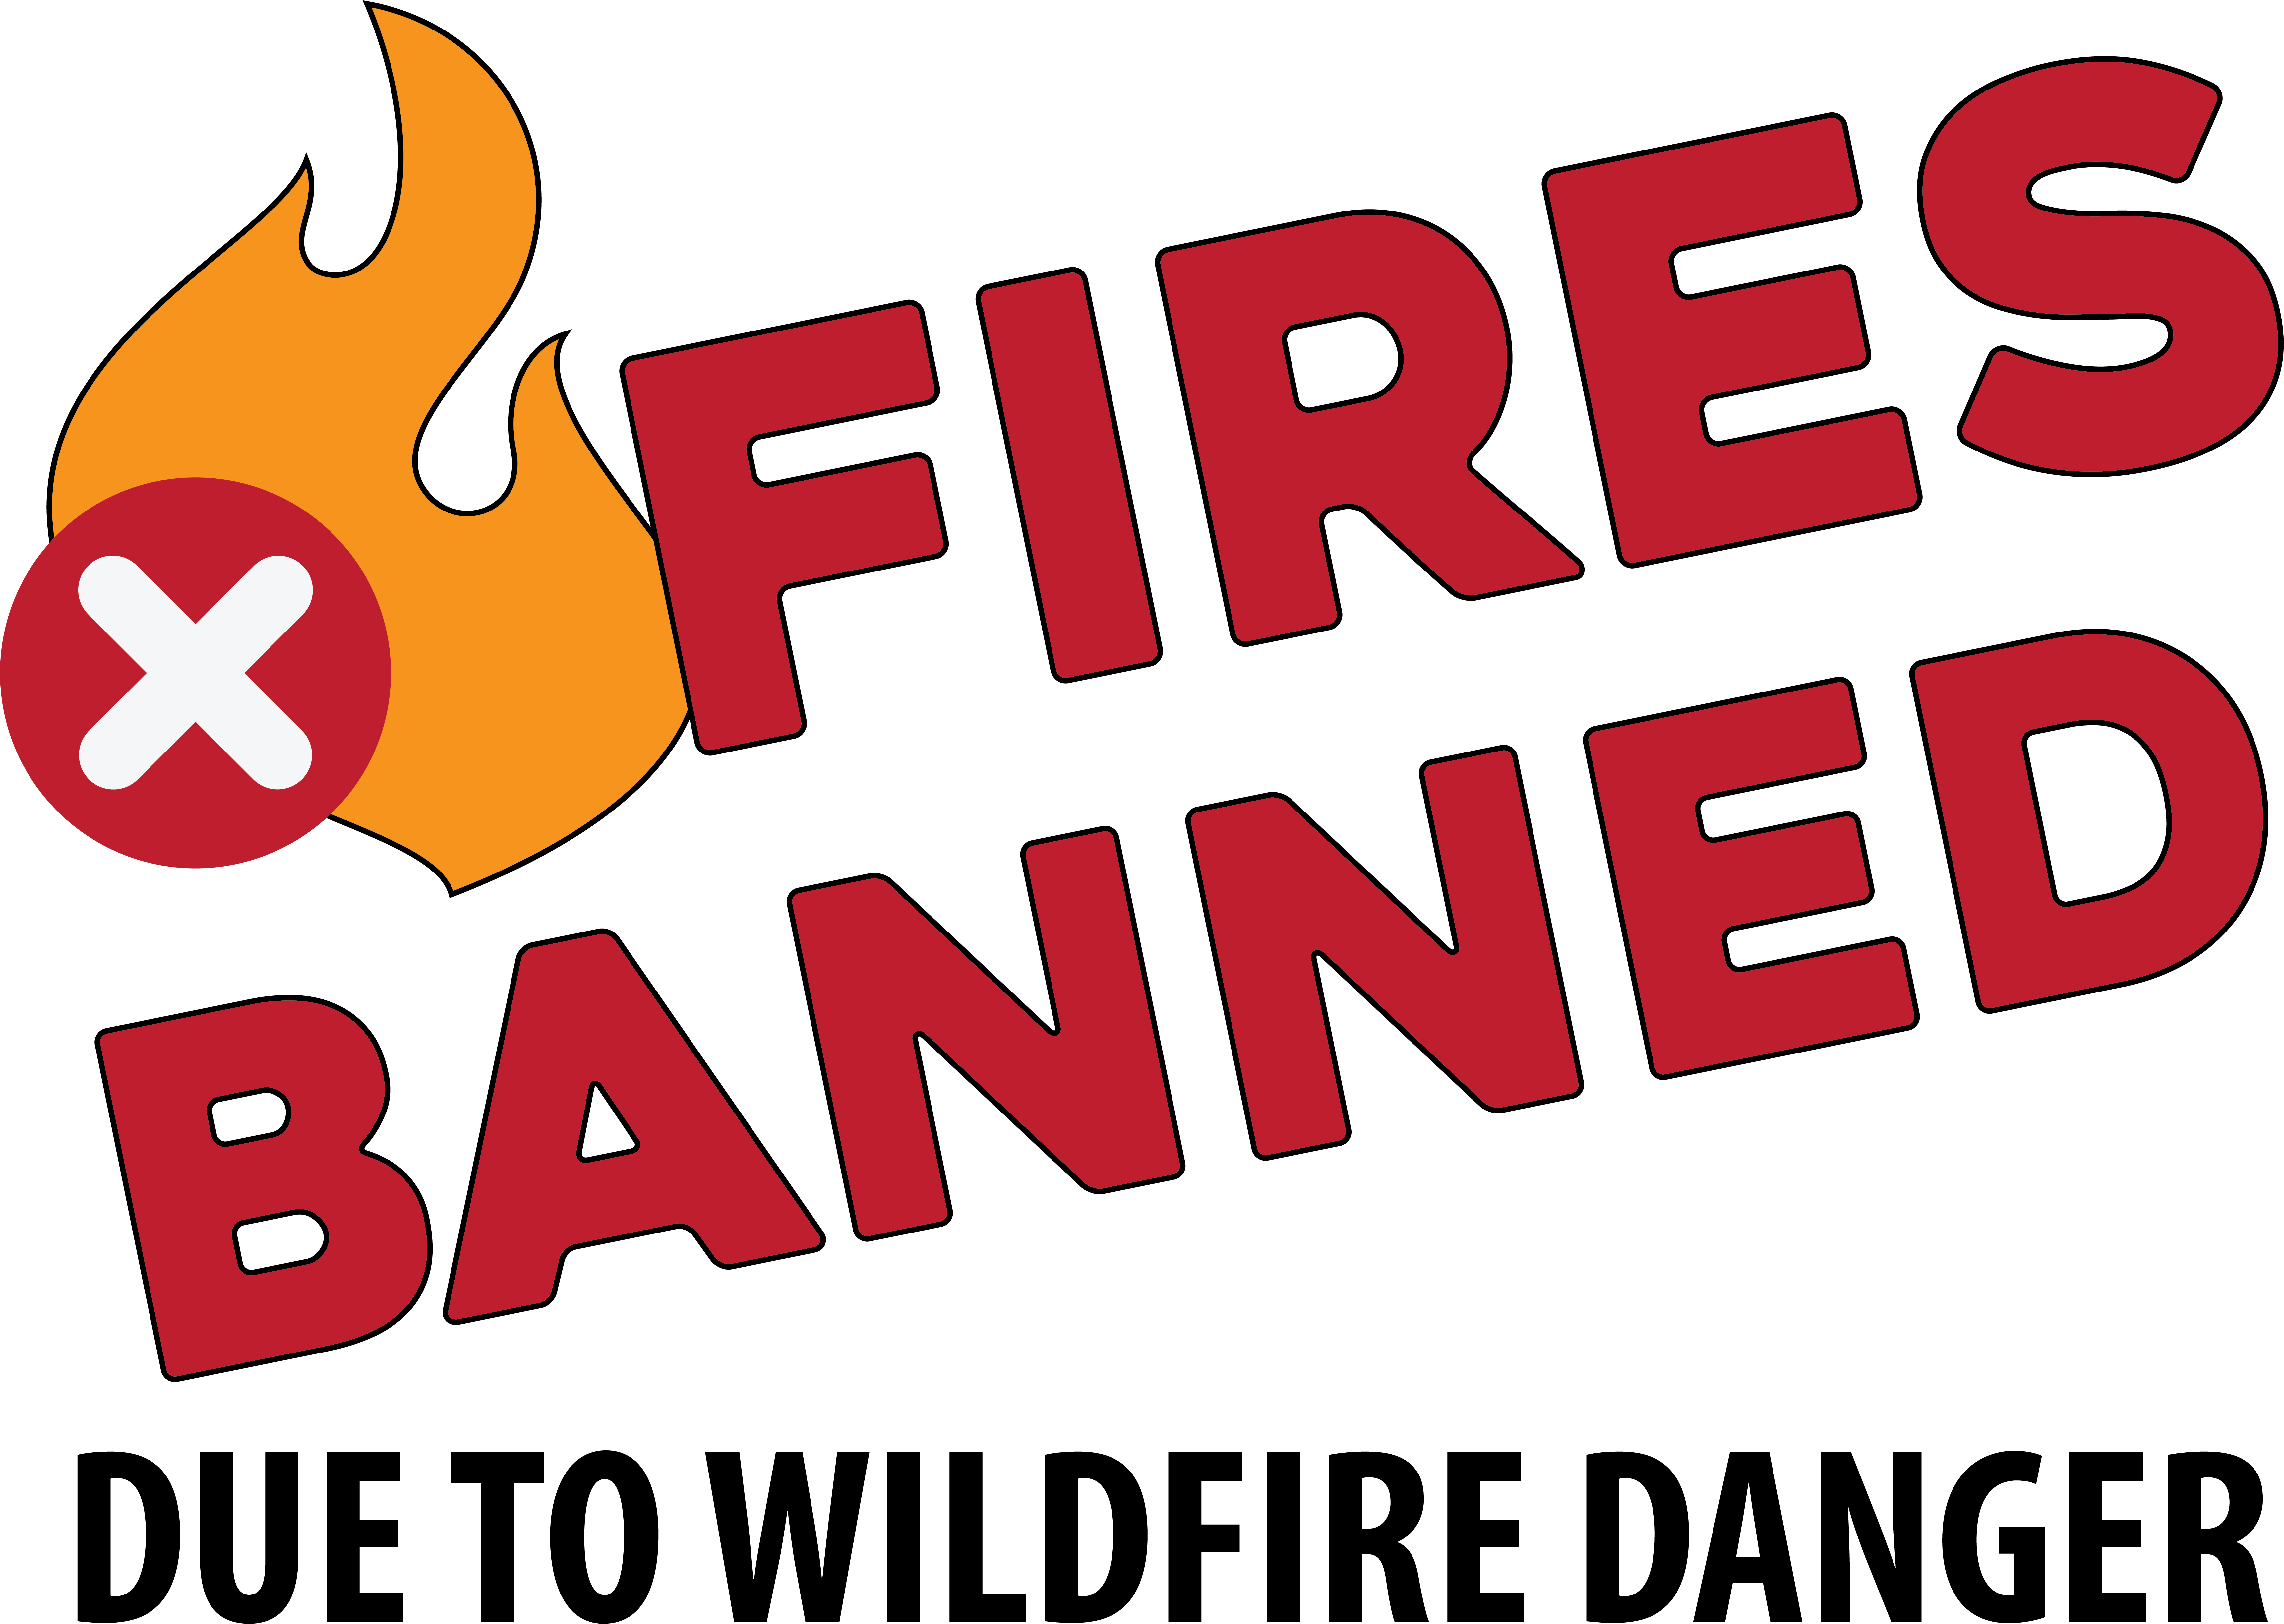 Fires banned due to wildfire danger with X prohibited symbol over a flame